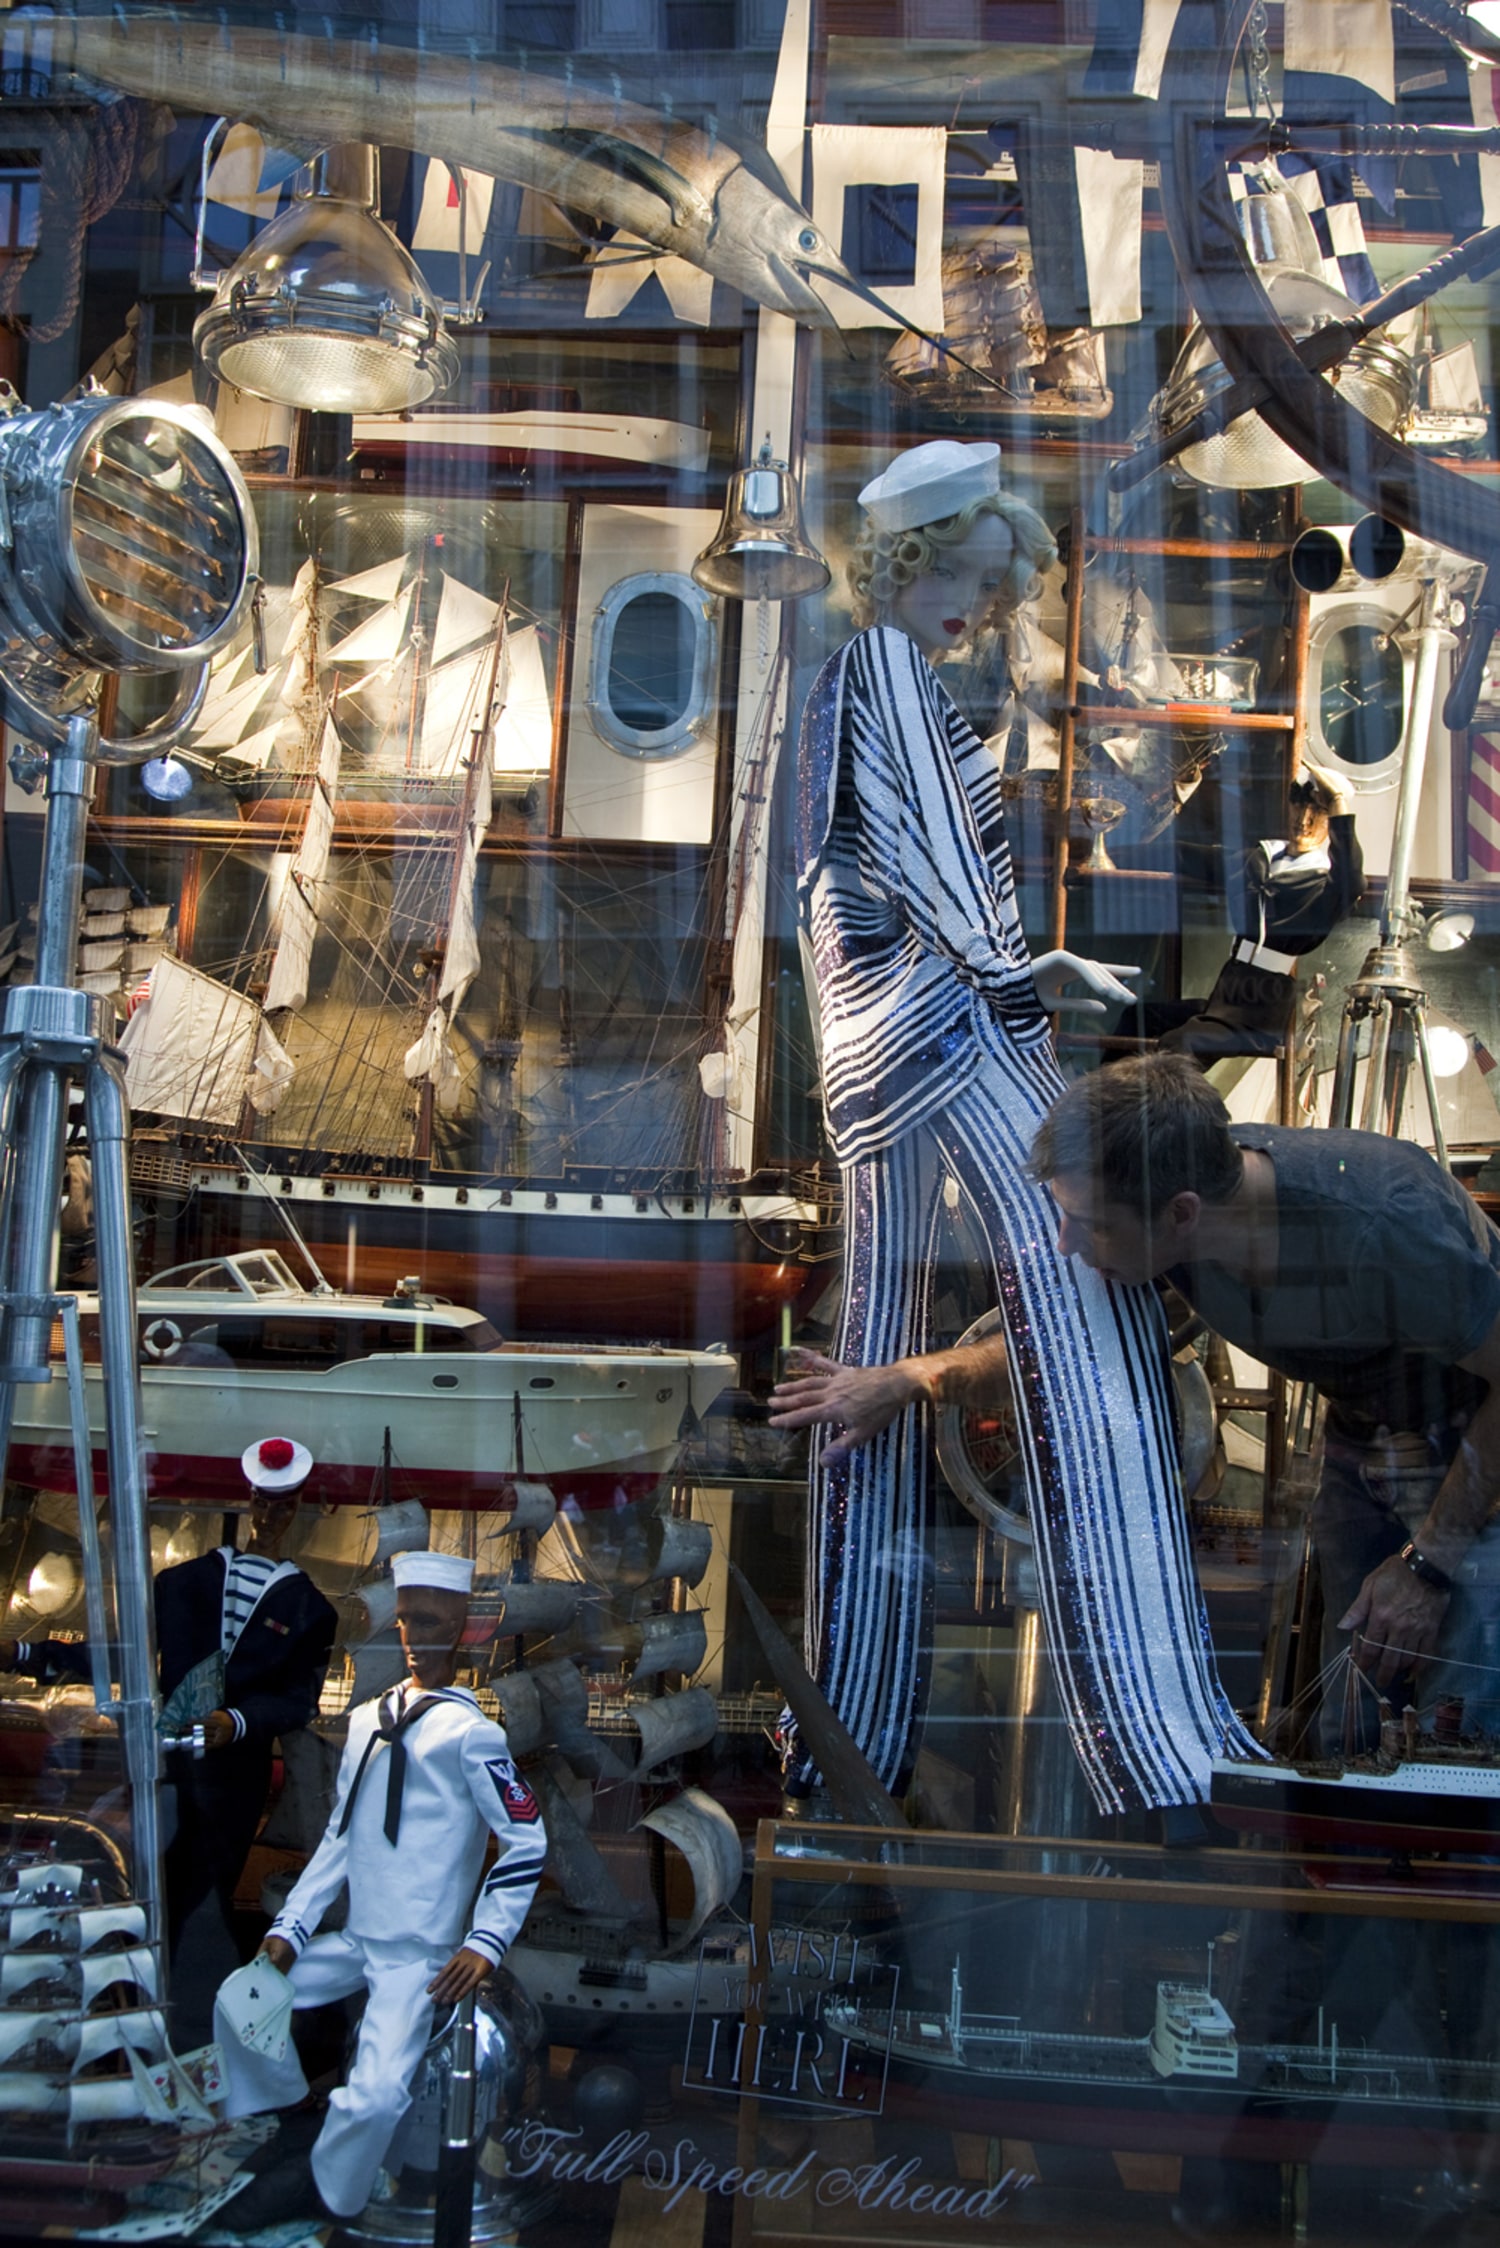 Out & About: The Designer With a Gumball Machine at Bergdorf